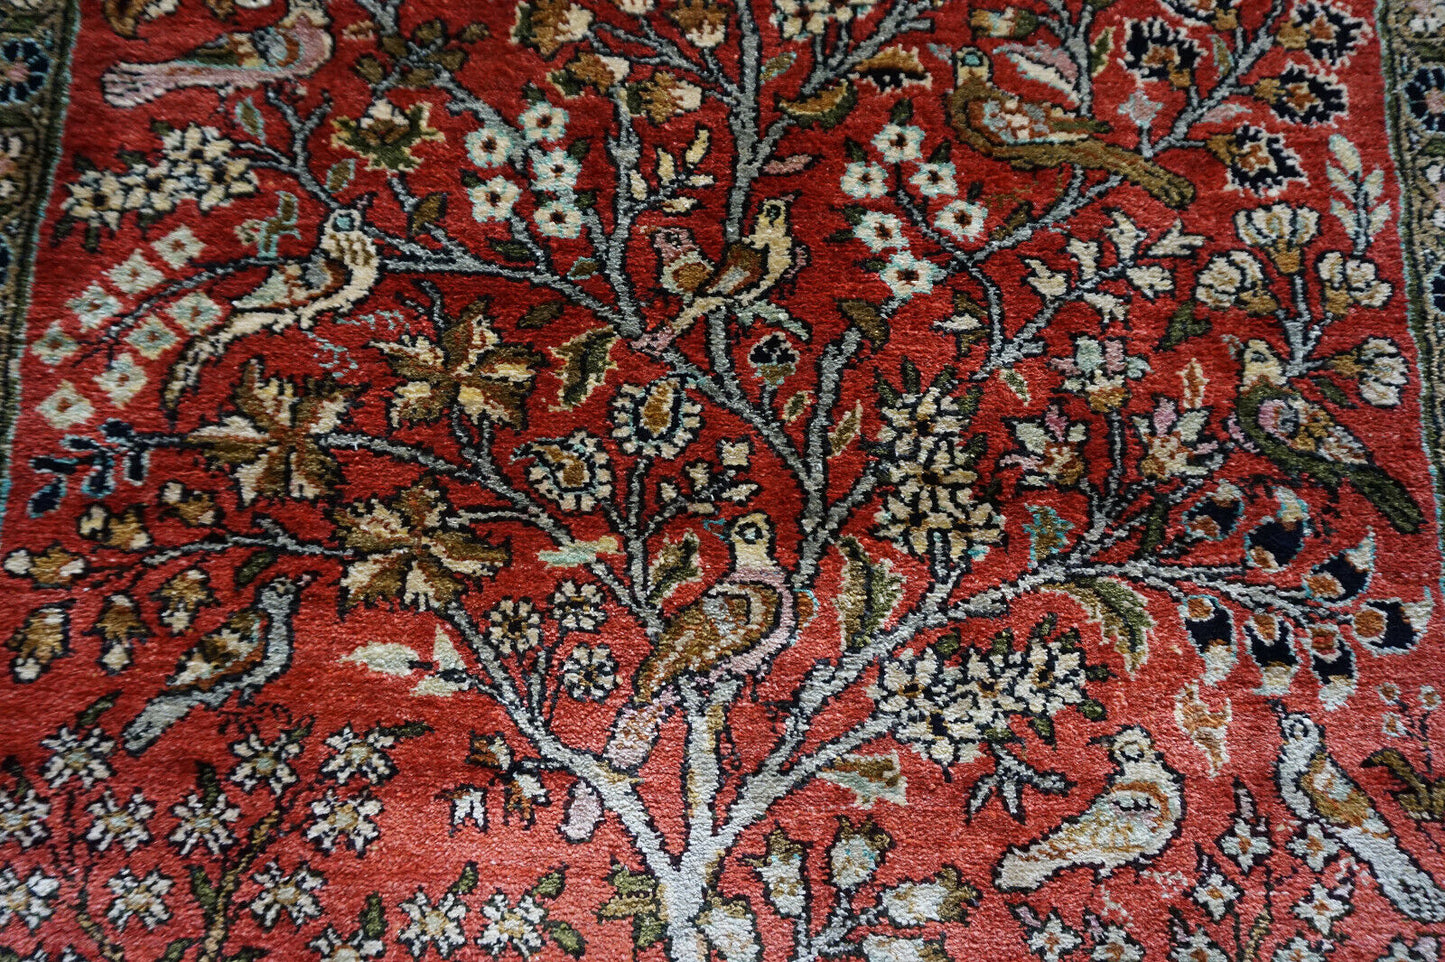 Close-up of the intricate "tree of life" motif on the Persian Qum silk rug